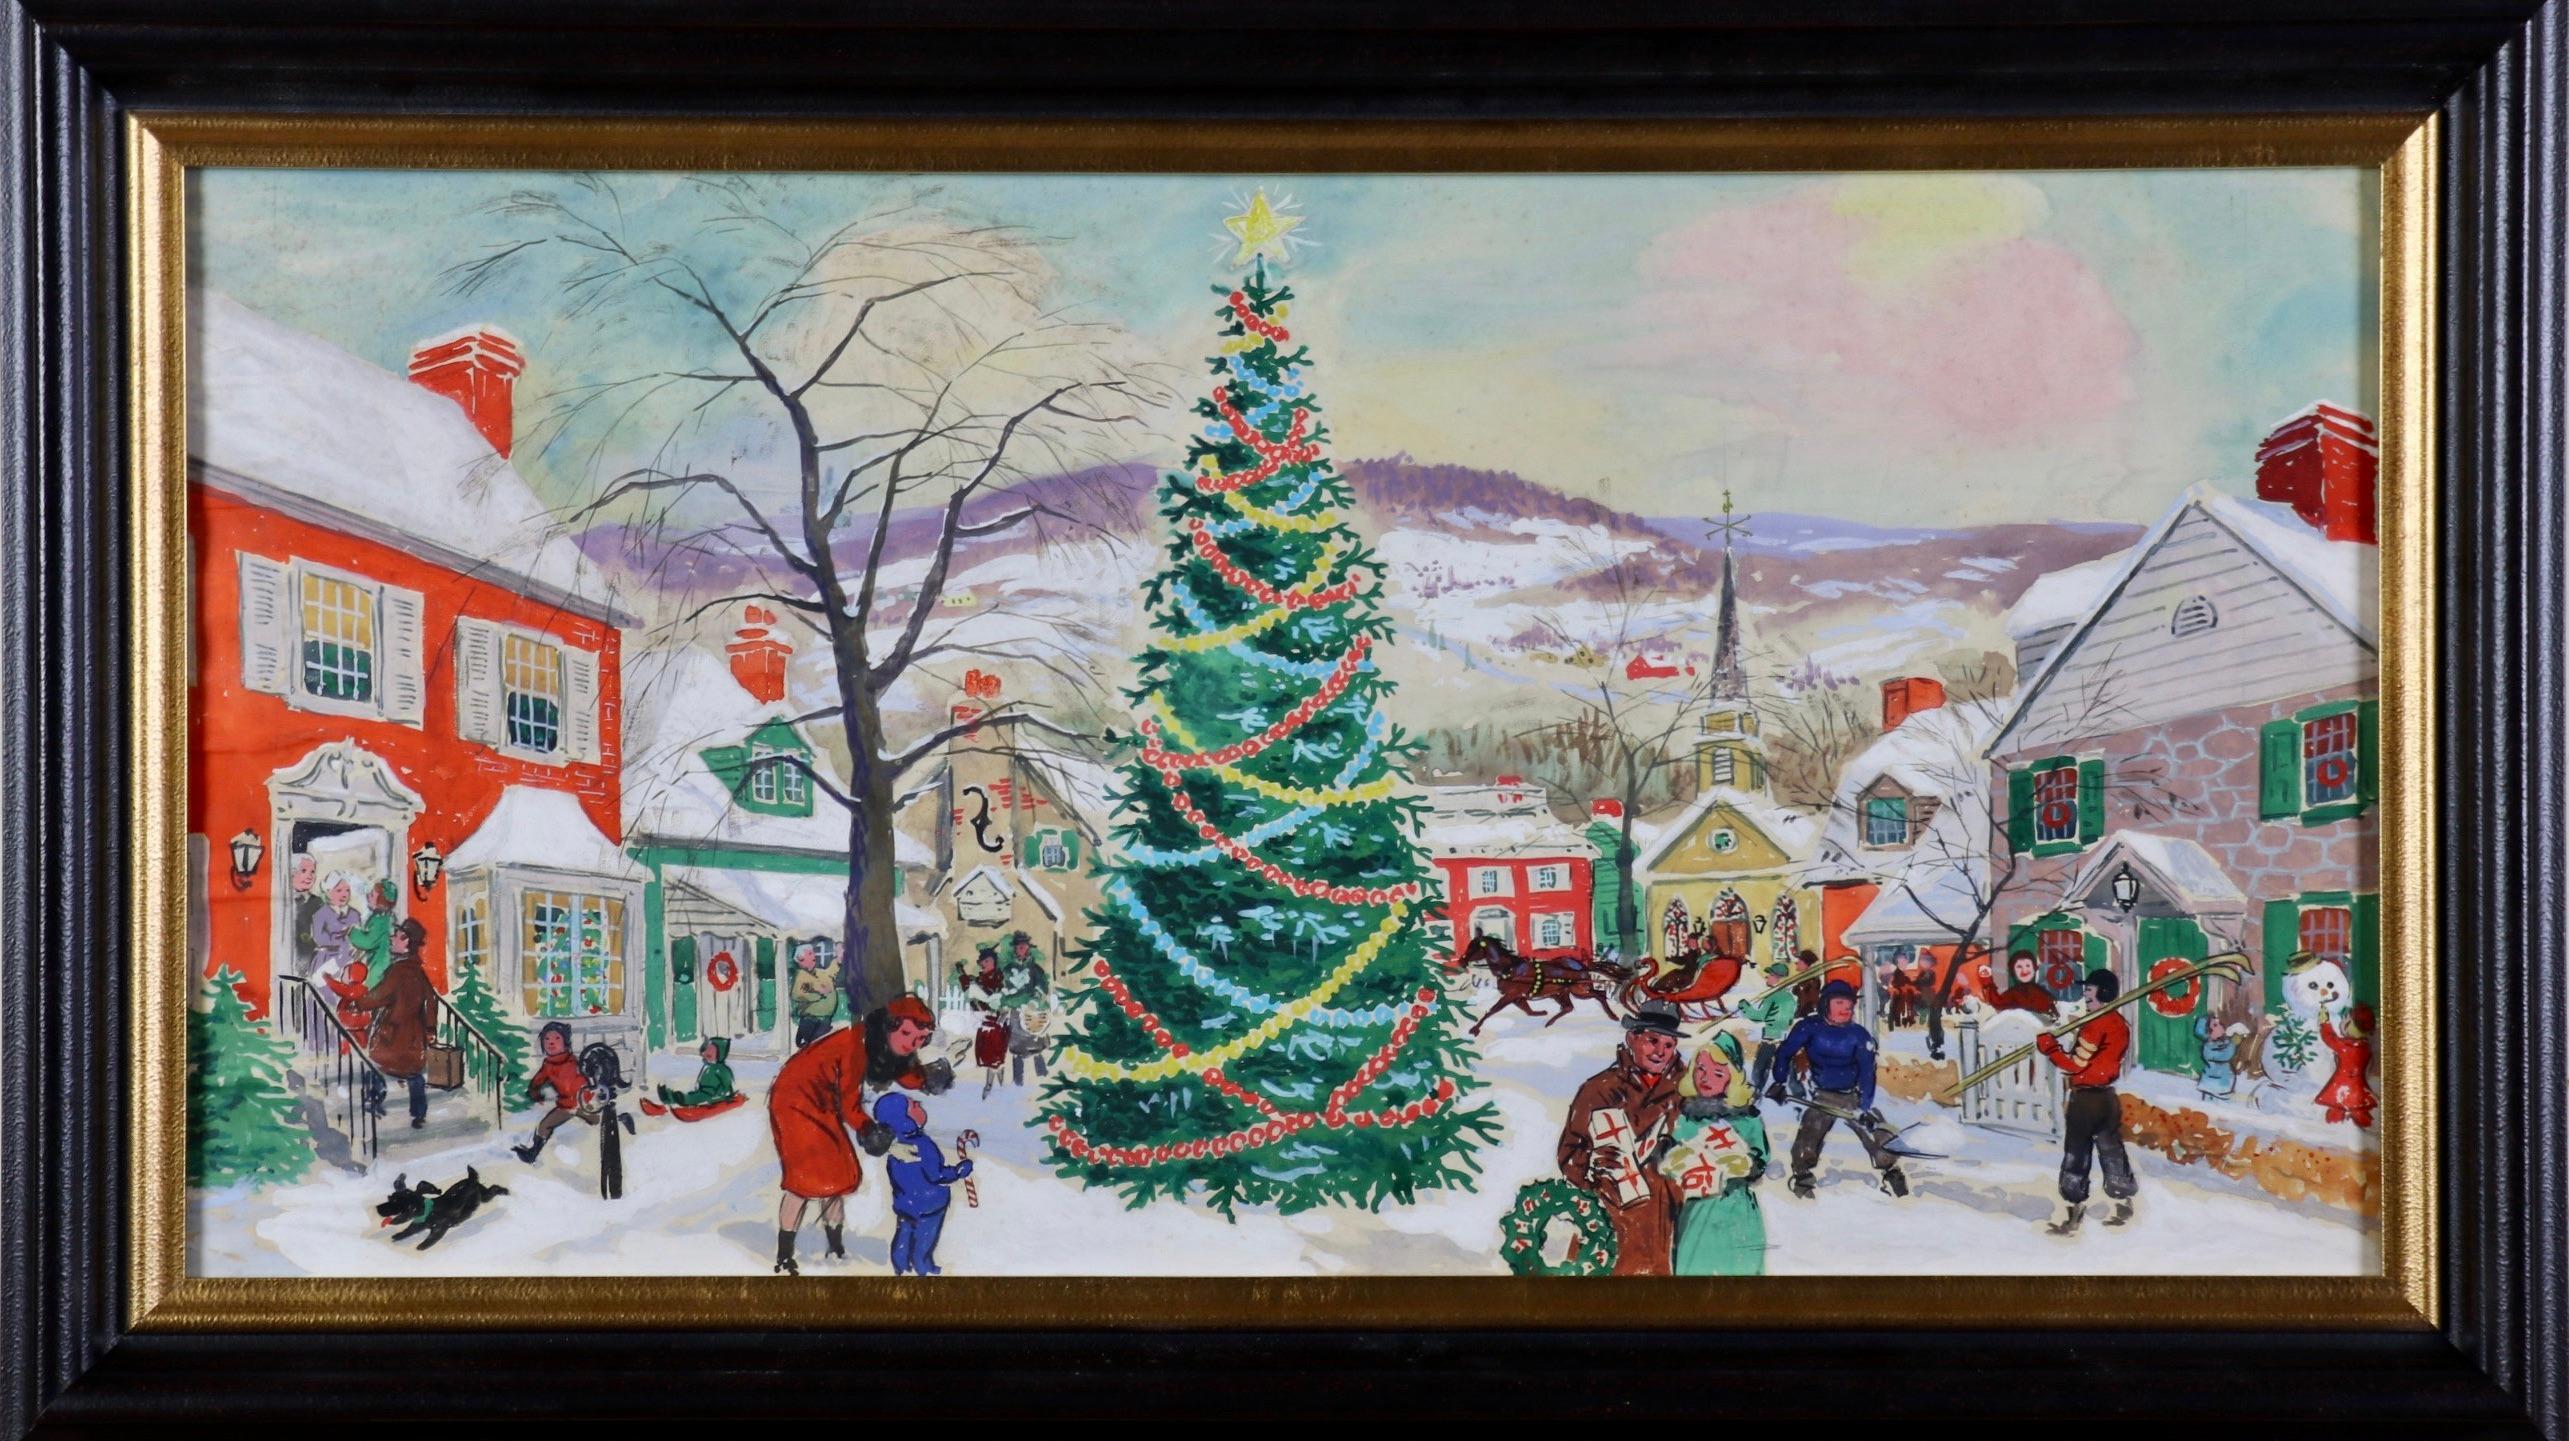 Christmas Tree in Village Square - Painting by Conrad Dickel